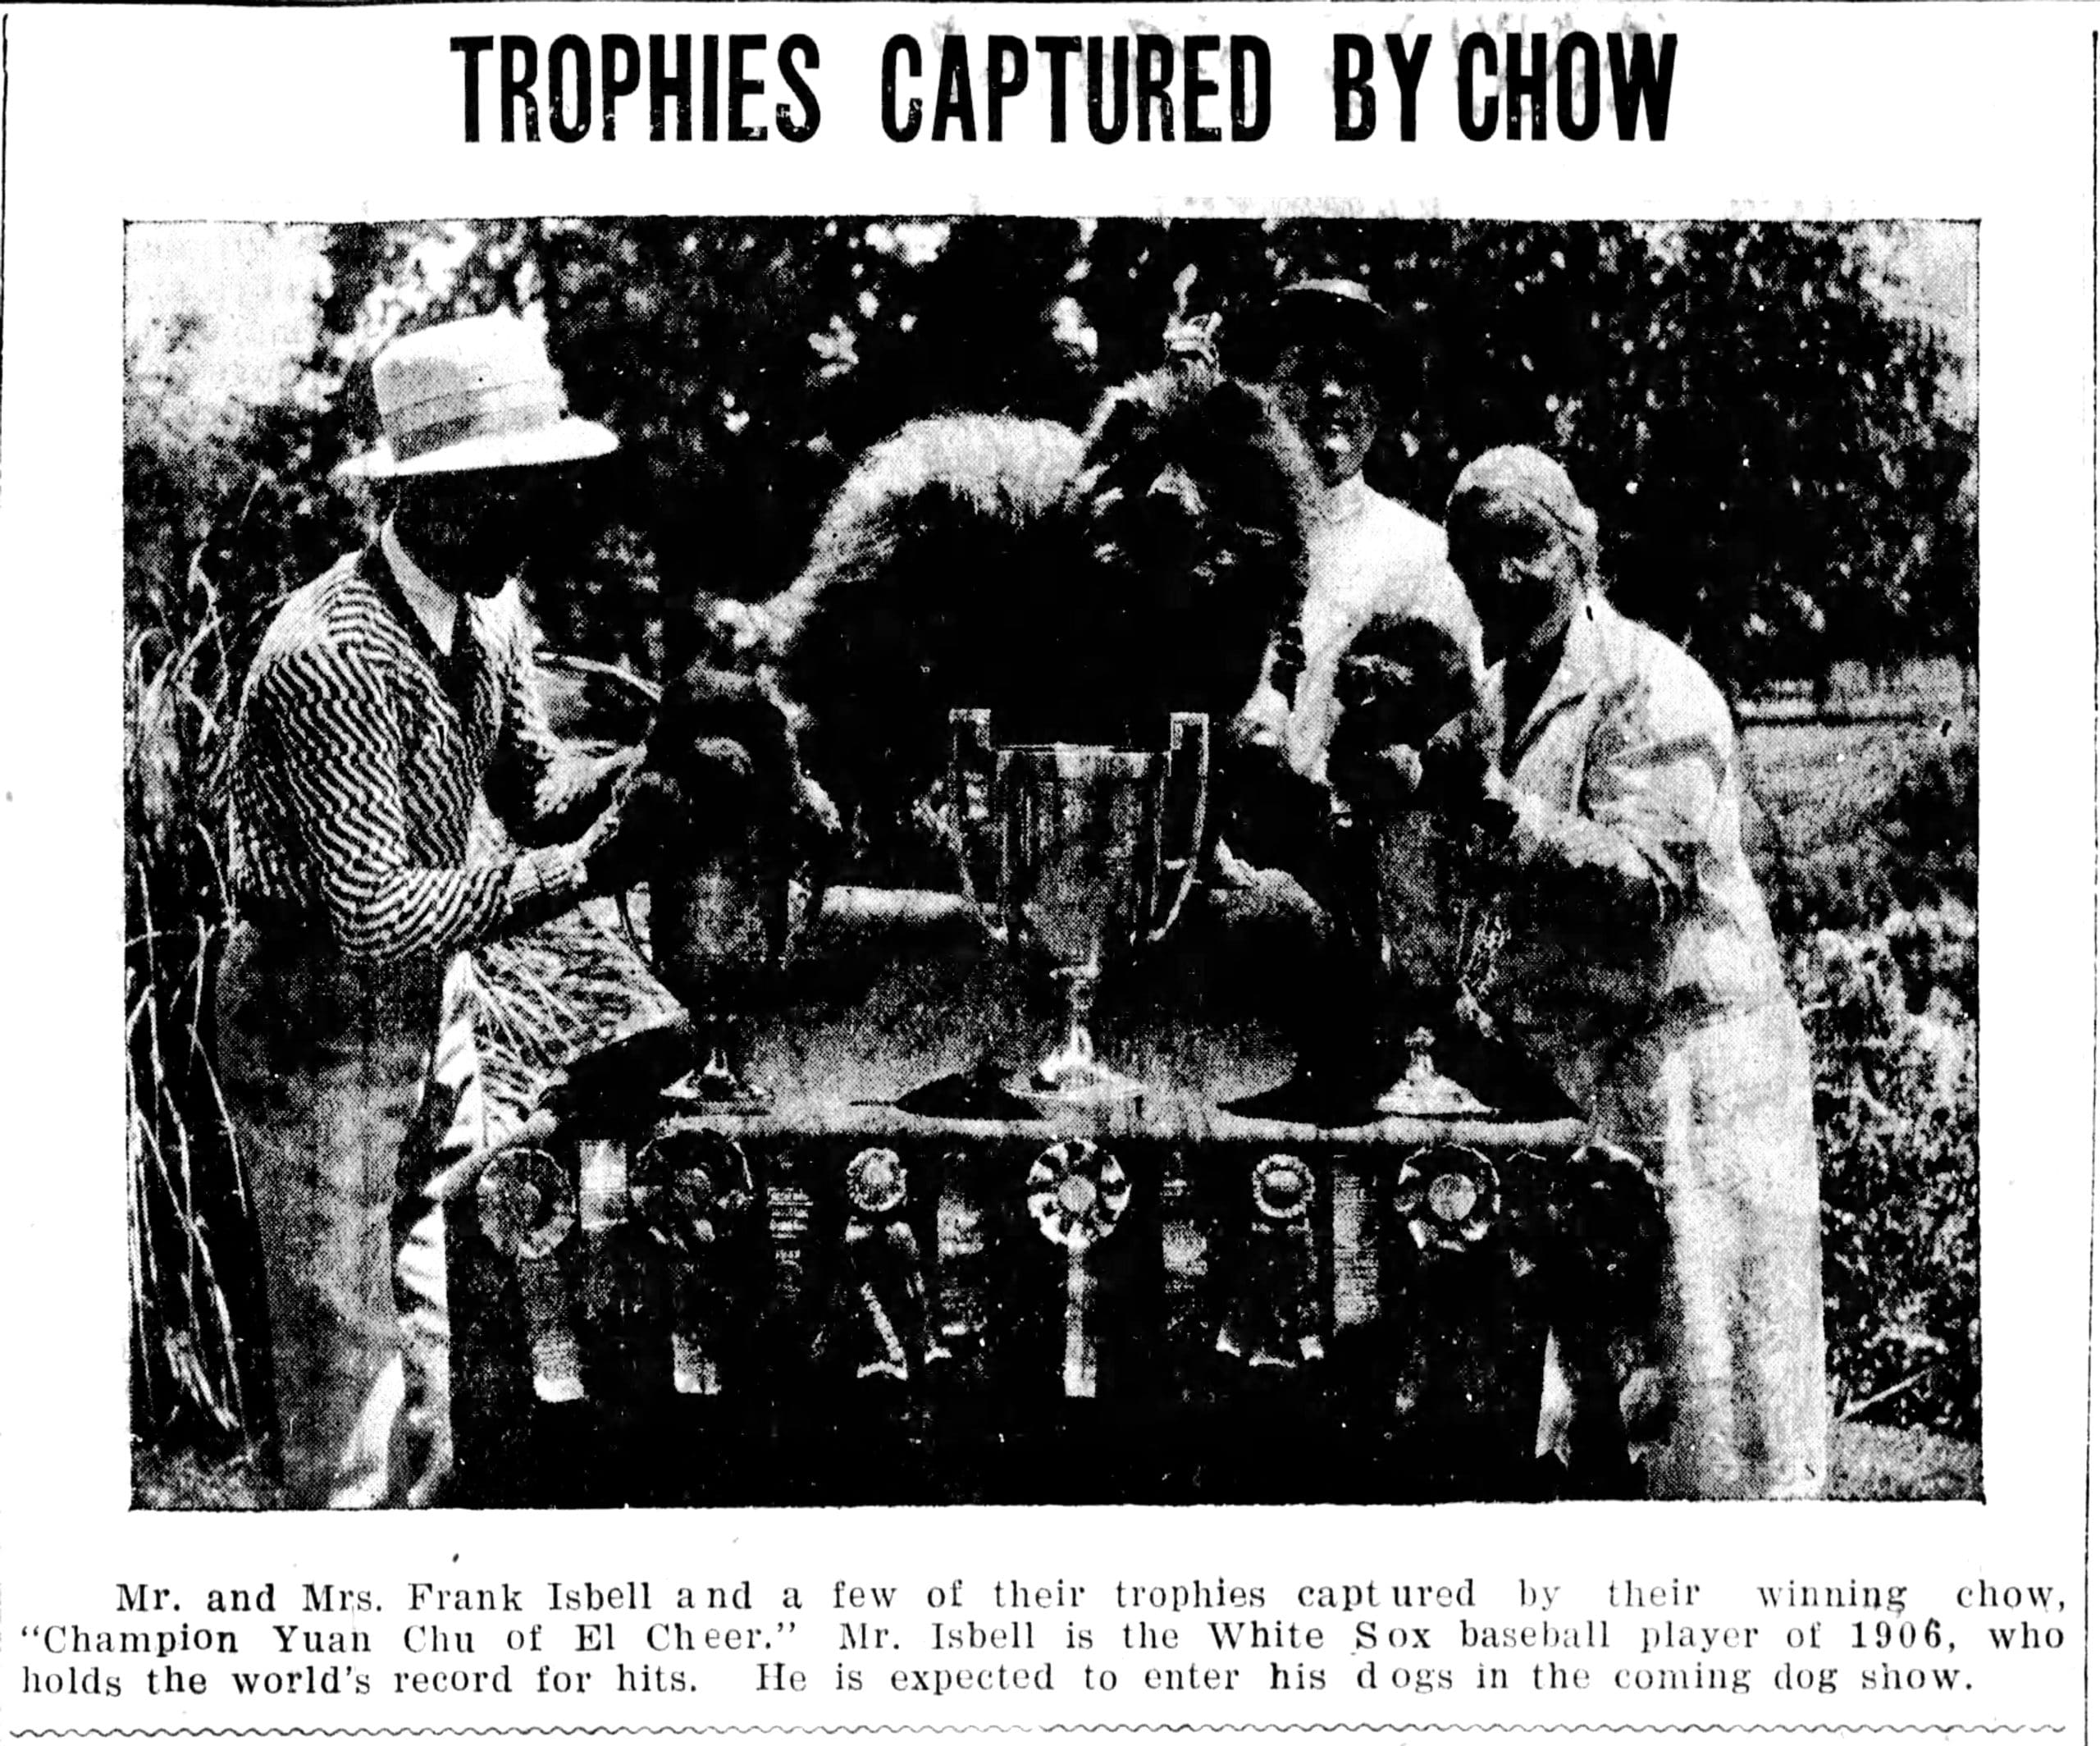 1906 Chicago White Sox Record holder Frank Isbell and his Best in Show Chow  - ChowTales